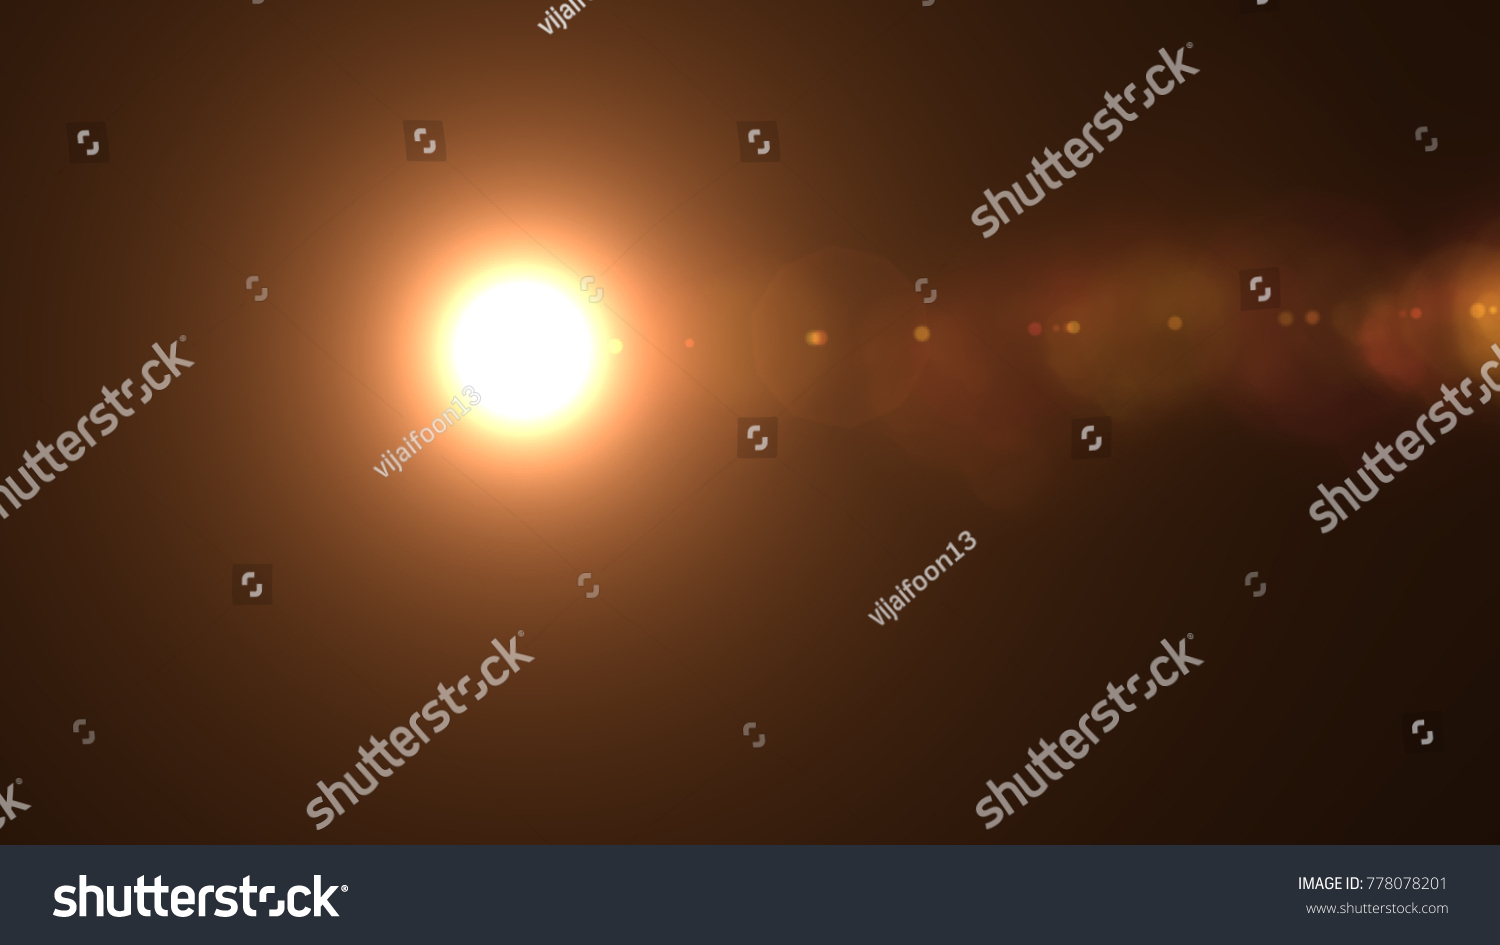 Lens flare , Abstract overlays background. #778078201